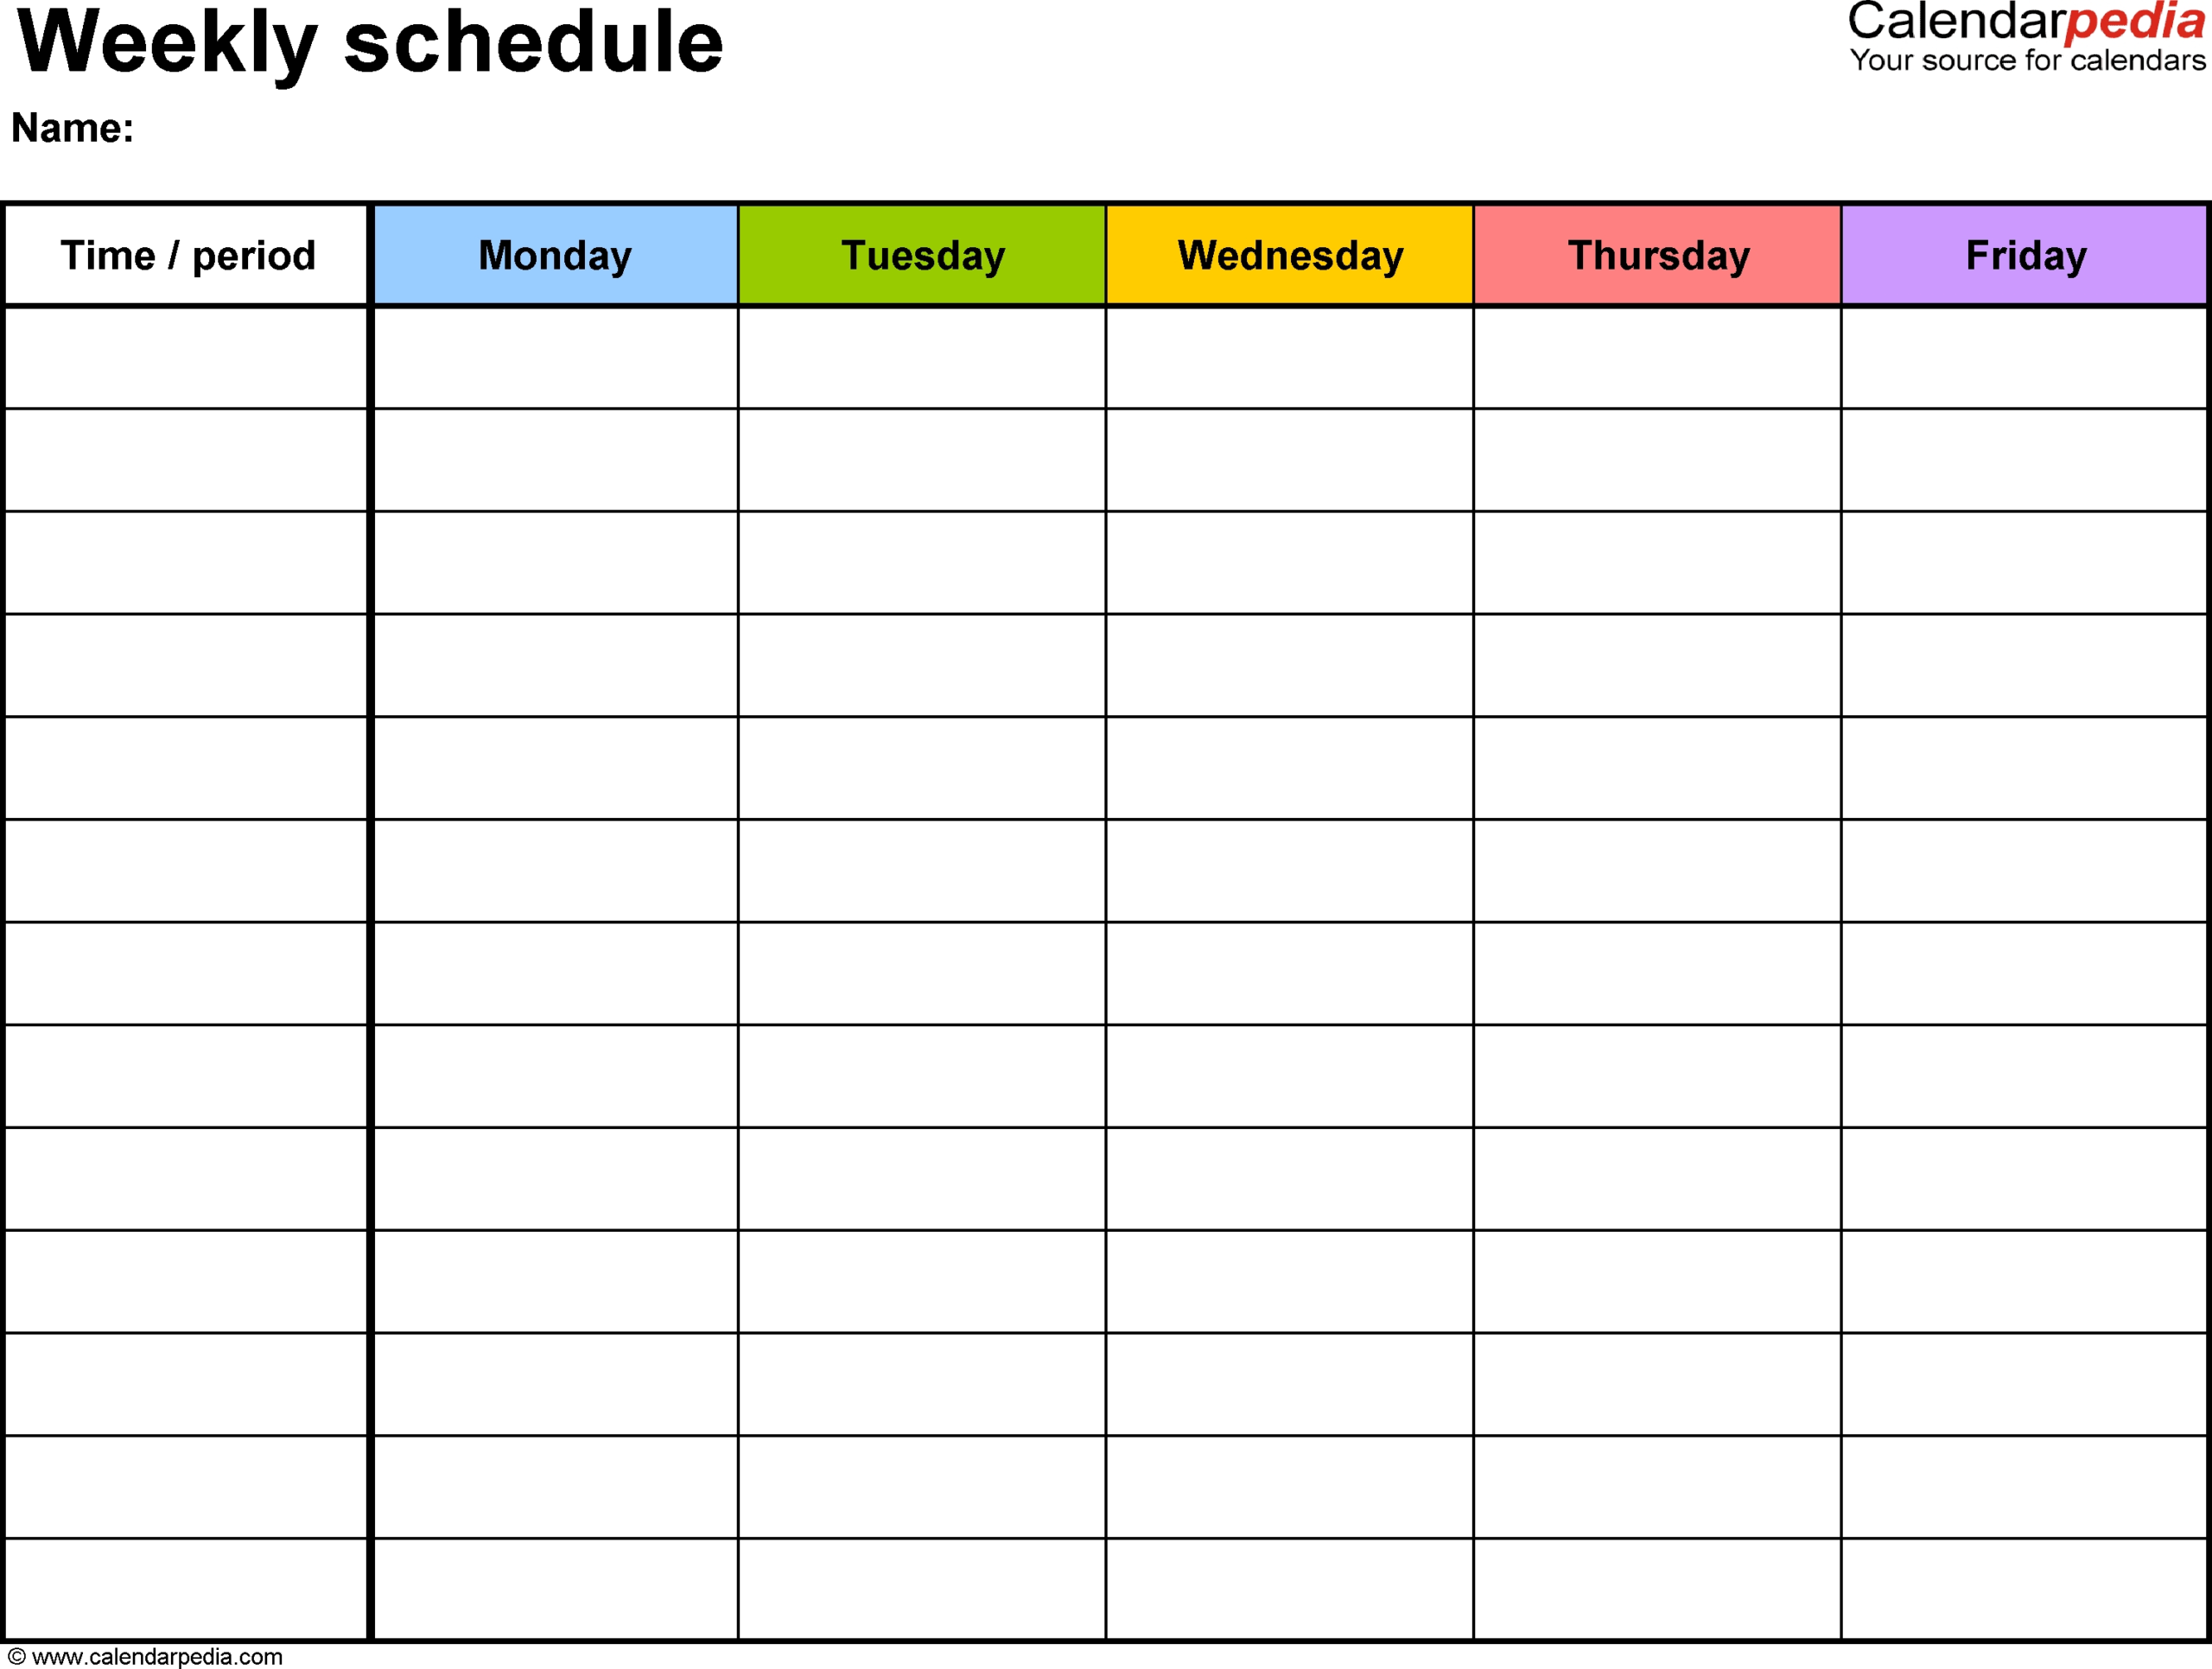 Blank Schedule Sheet With Times  Calendar Inspiration Design inside Blank Schedule With Hourly Counter